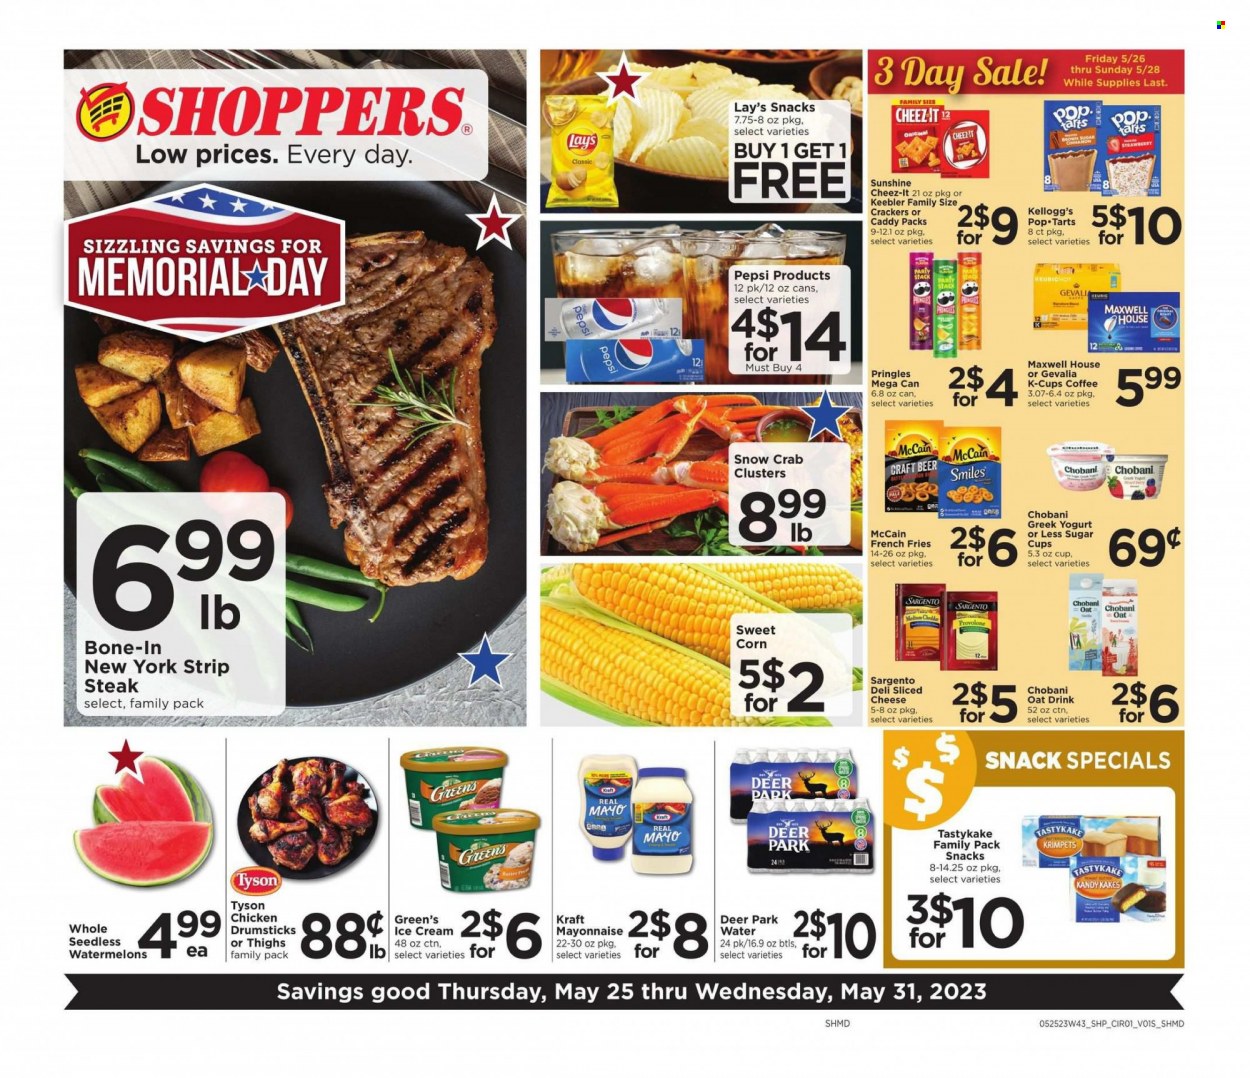 thumbnail - Shoppers Flyer - 05/25/2023 - 05/31/2023 - Sales products - tart, corn, sweet corn, watermelon, crab, crab clusters, Kraft®, snack, sliced cheese, cheese, Provolone, Sargento, greek yoghurt, Chobani, Sunshine, mayonnaise, ice cream, McCain, potato fries, french fries, crackers, Kellogg's, Pop-Tarts, Keebler, Pringles, Lay’s, Cheez-It, salty snack, Pepsi, soft drink, water, Maxwell House, coffee, coffee capsules, K-Cups, Gevalia, Keurig, alcohol, beer, chicken drumsticks, chicken, beef meat, steak, striploin steak. Page 1.